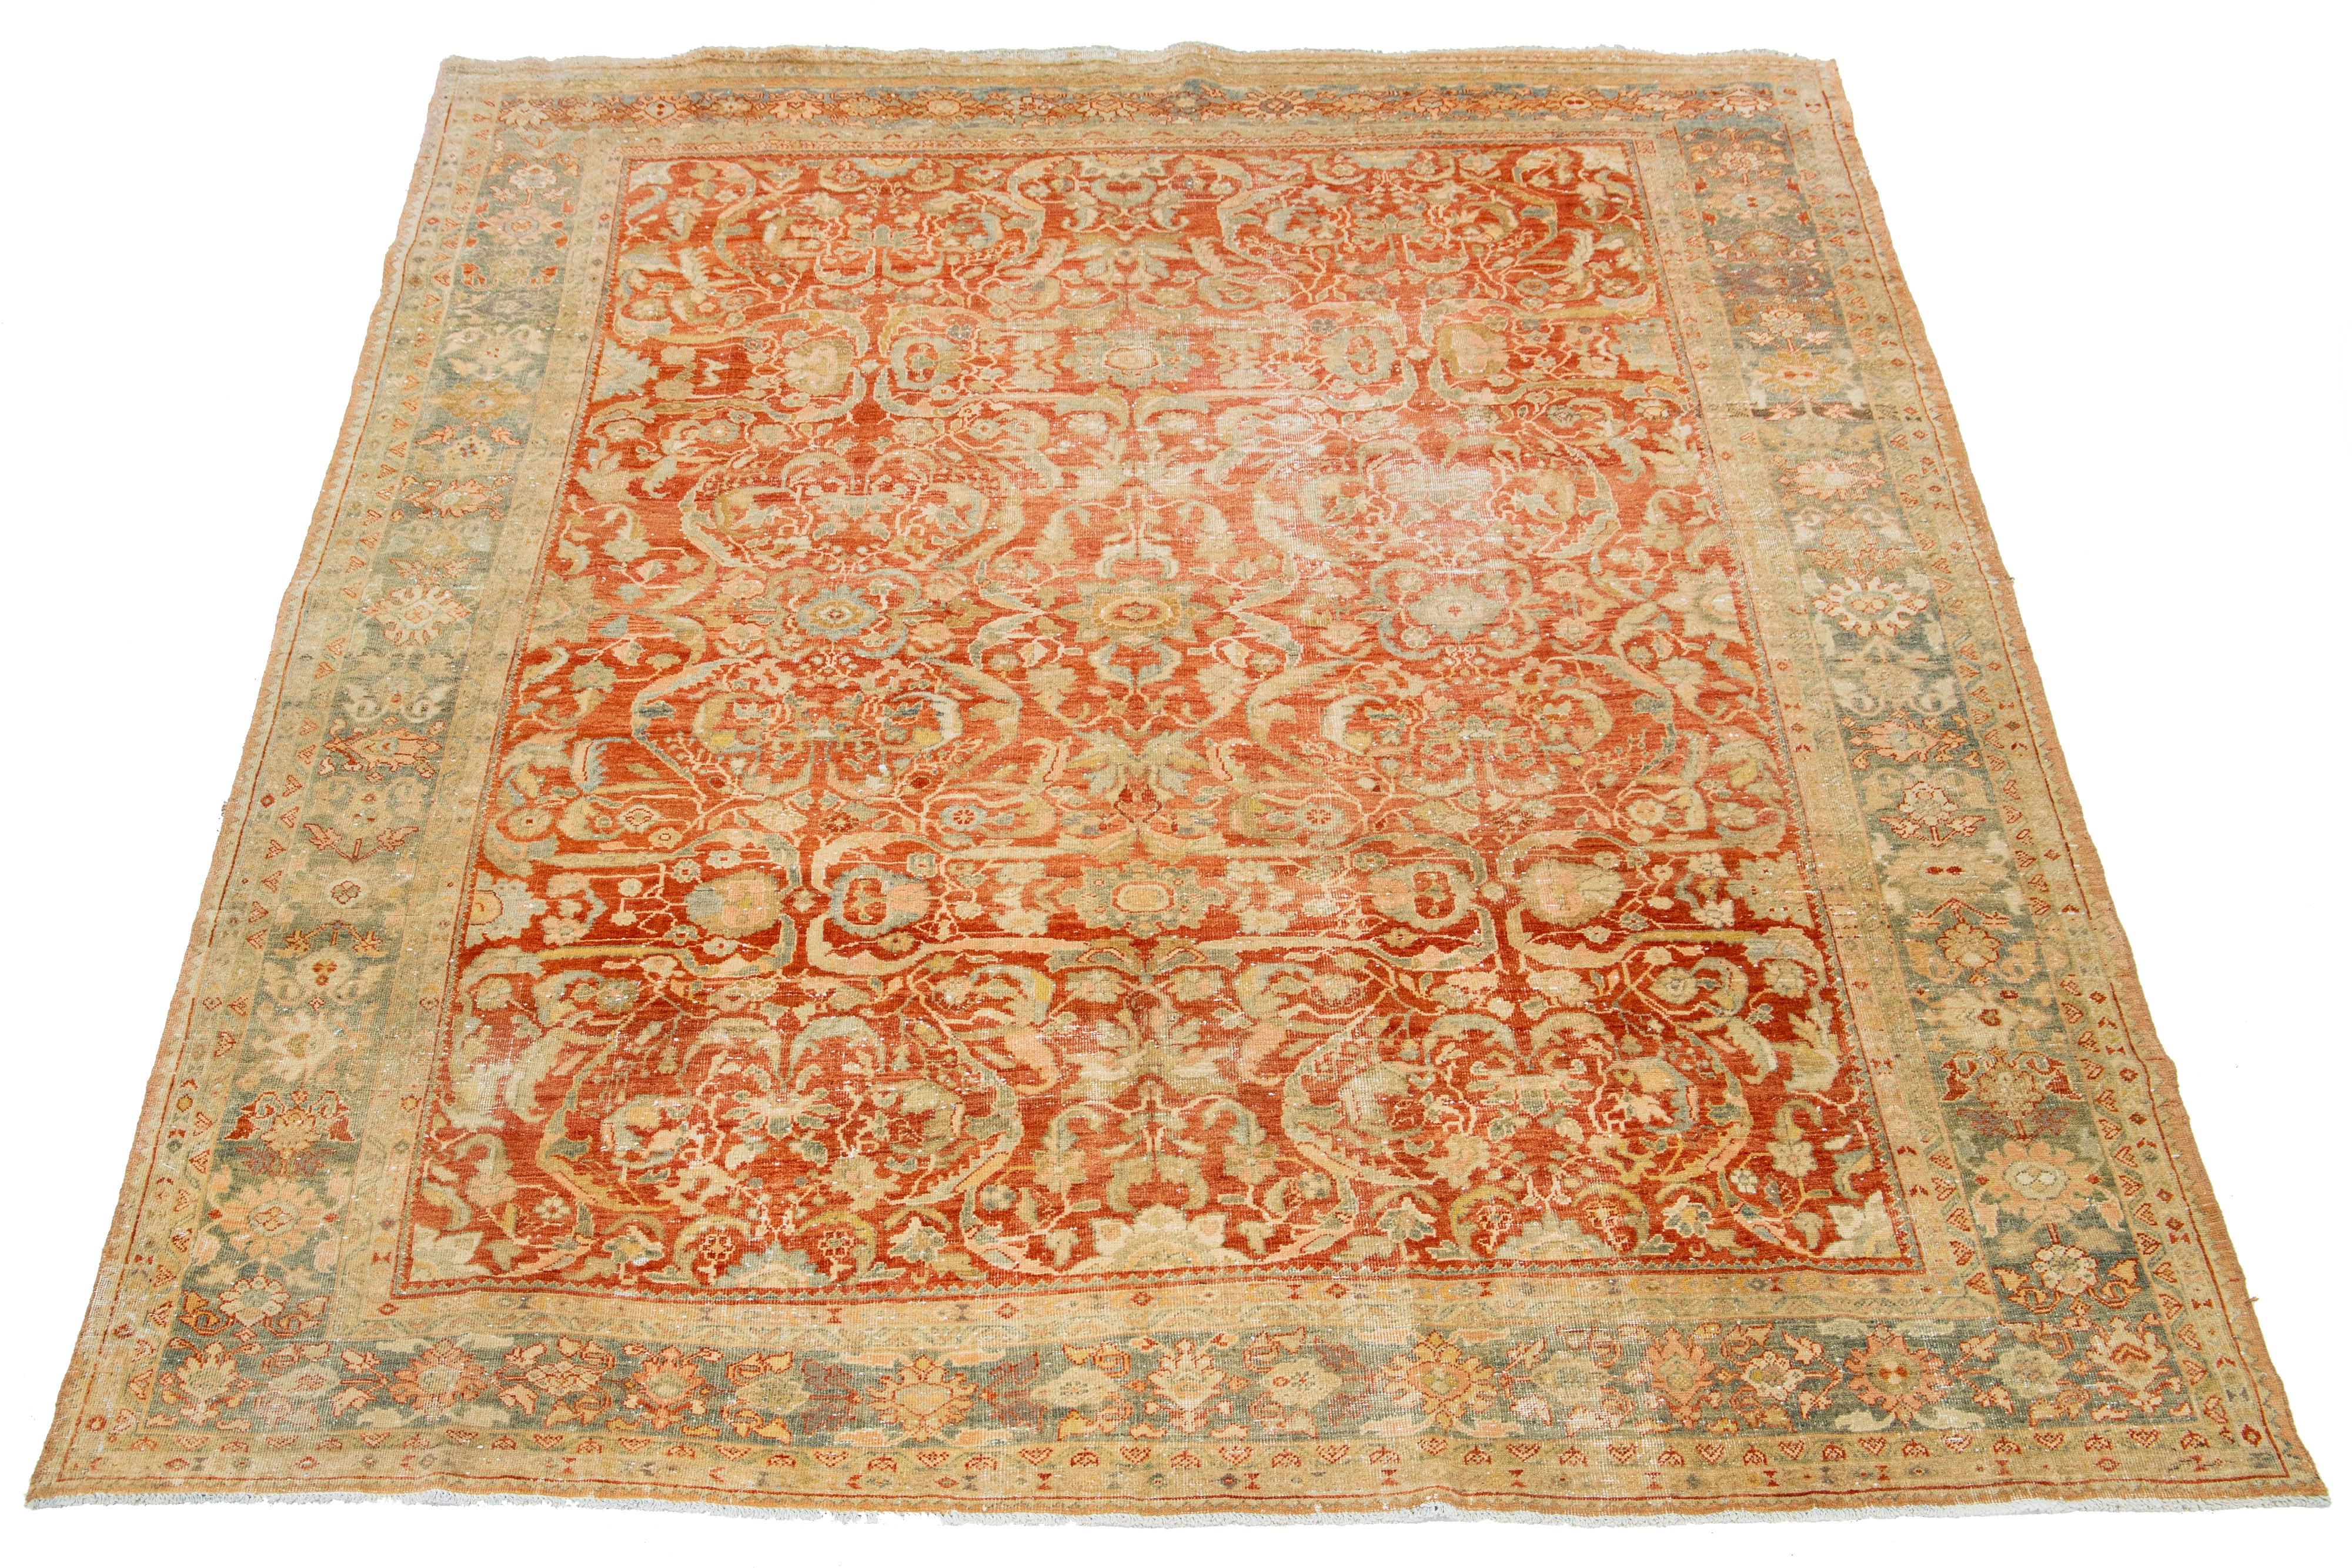 This Persian Heriz rug is handcrafted with wool that is knotted by hand. The field of the rug is adorned with a captivating design in a rust color, enhanced with beautiful shades of blue and peach.

This rug measures 8'10